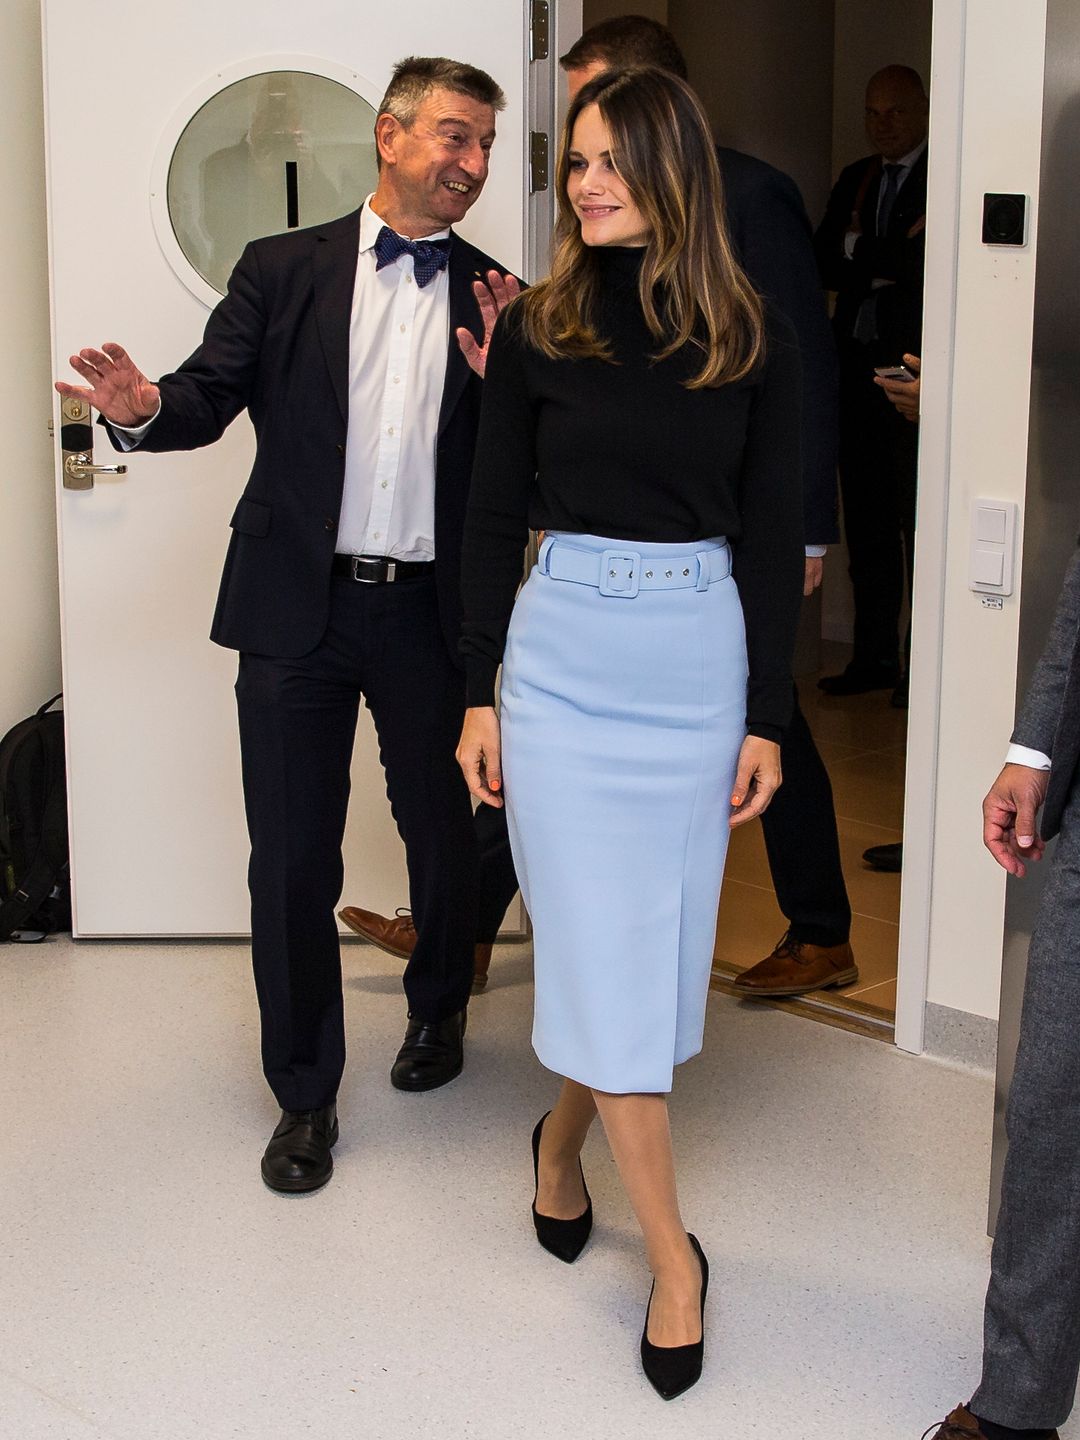 Princess Sofia of Sweden is given a tour of Stockholm University Brain Imaging Center. She wears a blue pencil skirt, heels and a black turtleneck